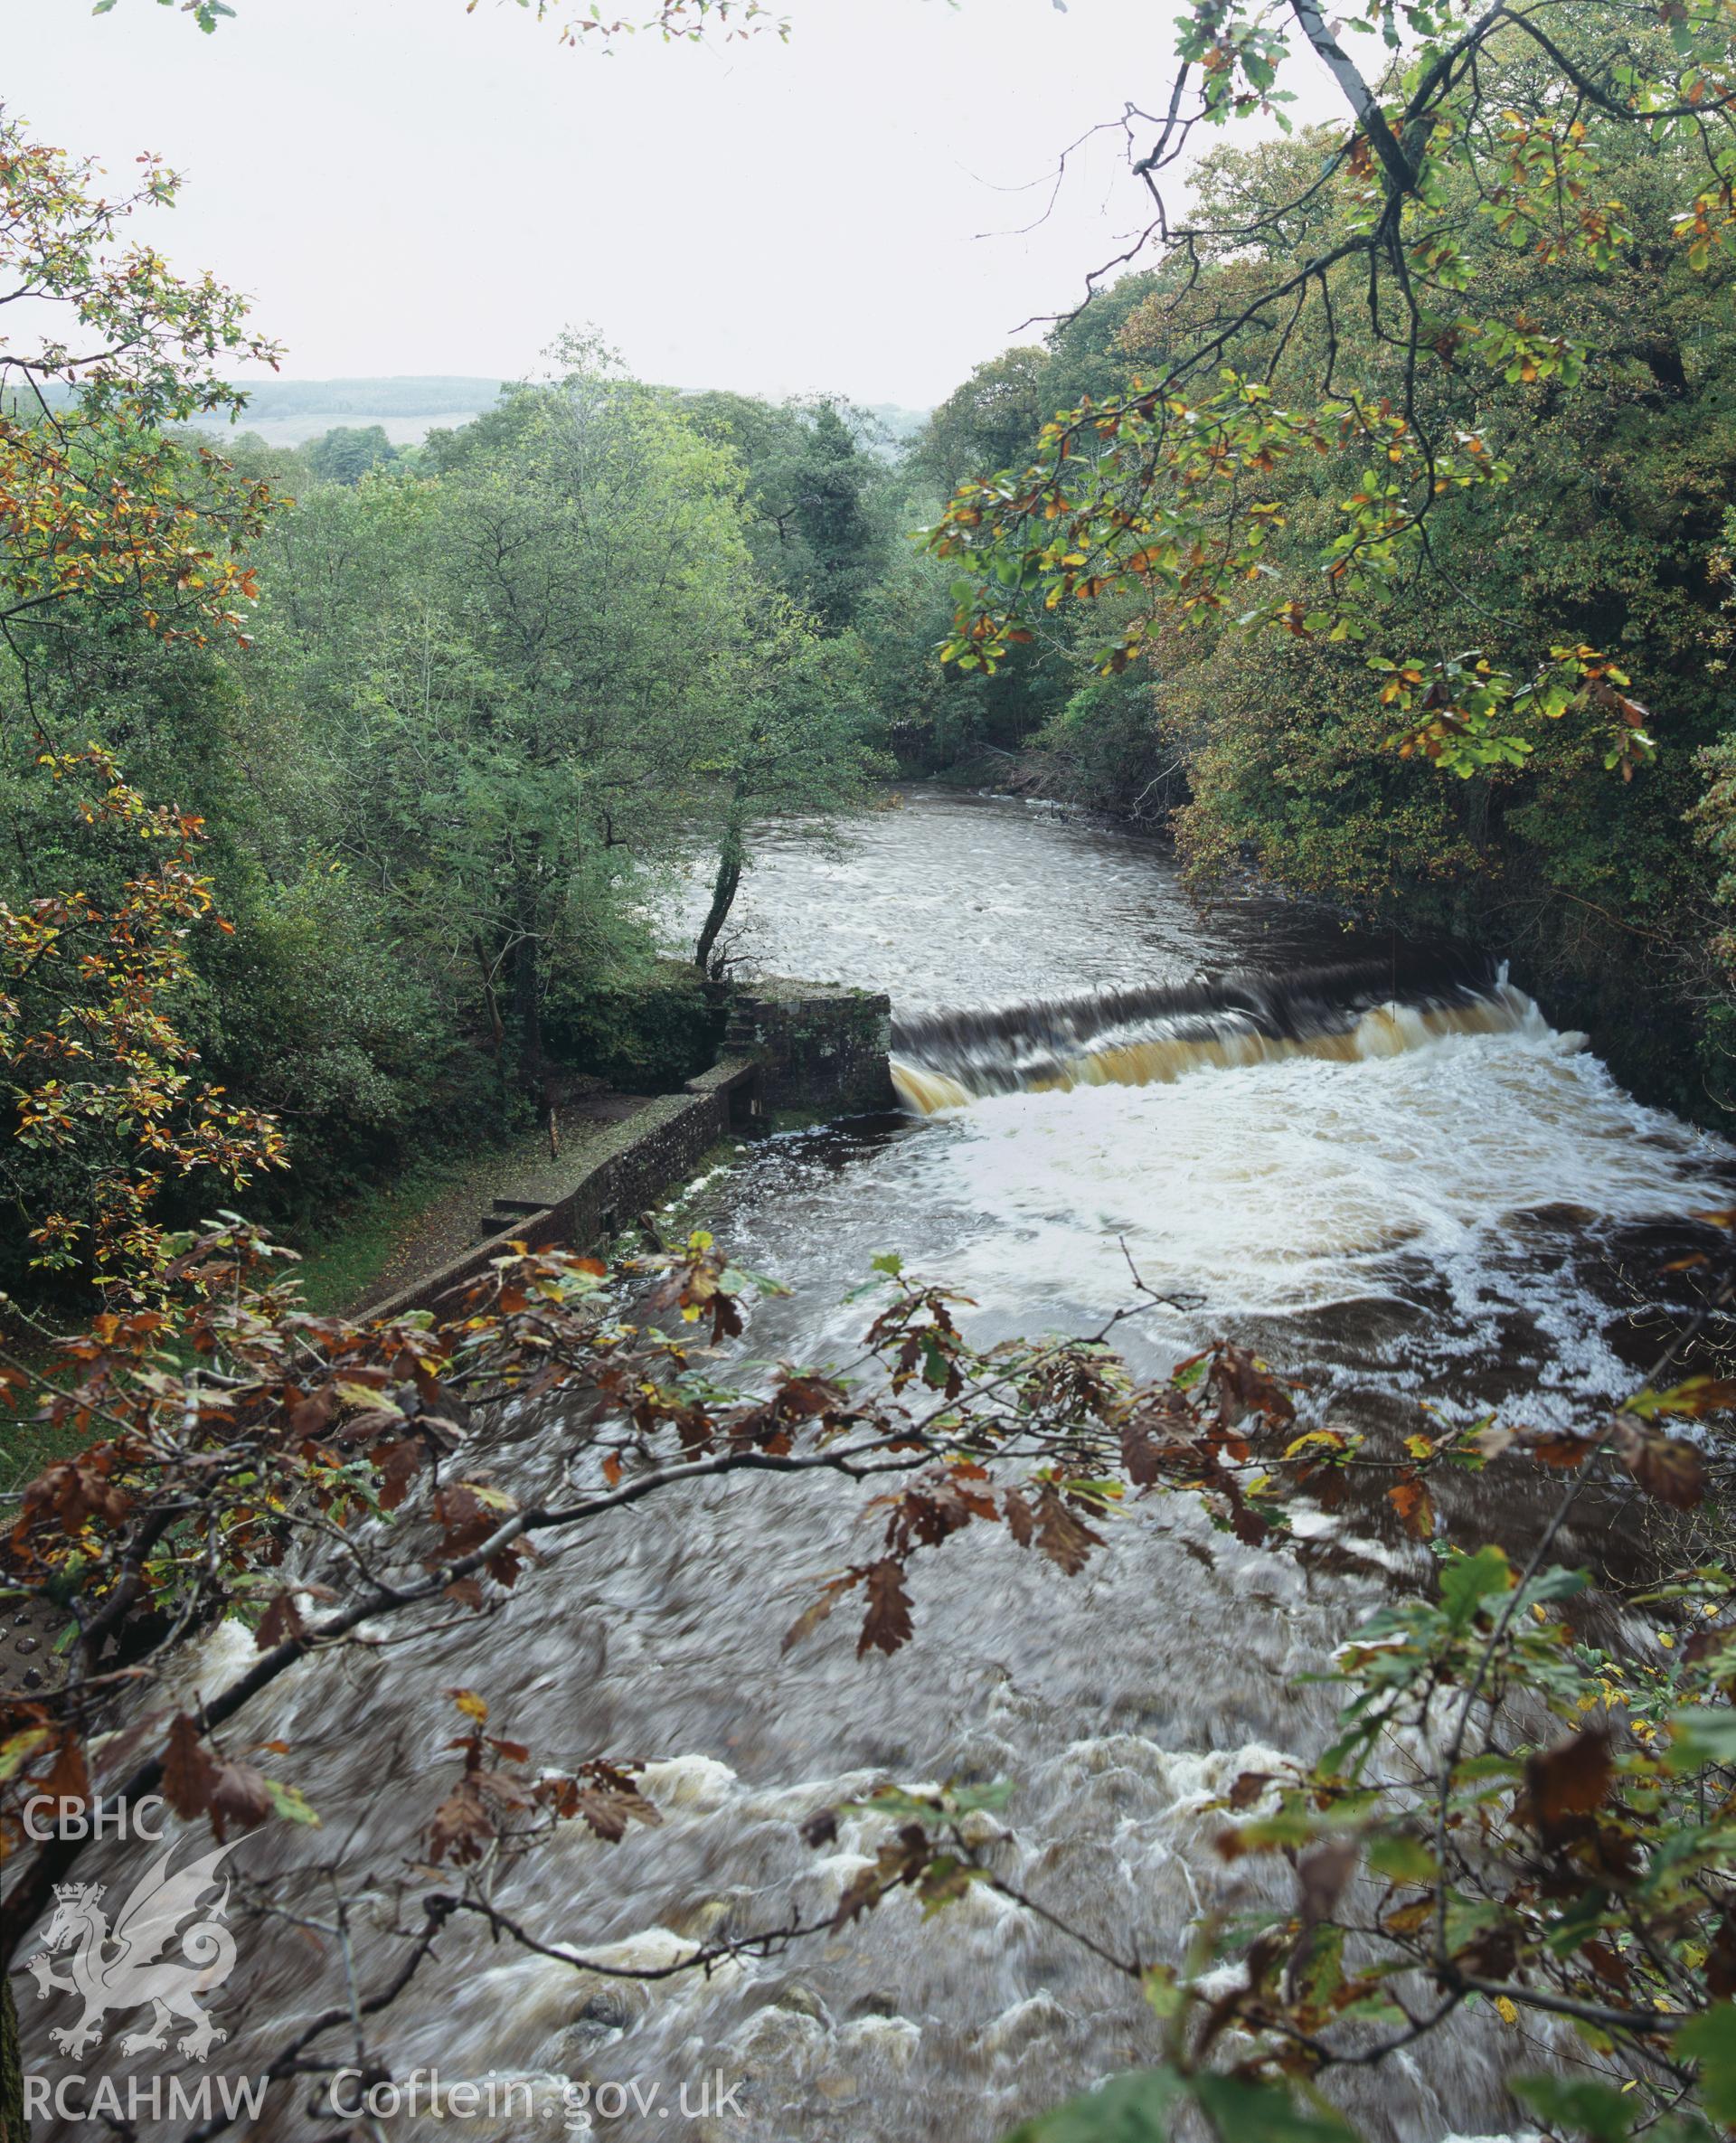 RCAHMW colour transparency showing view of the Abercraf Feeder Weir on the, Swansea Canal, taken by I.N. Wright, October 2005